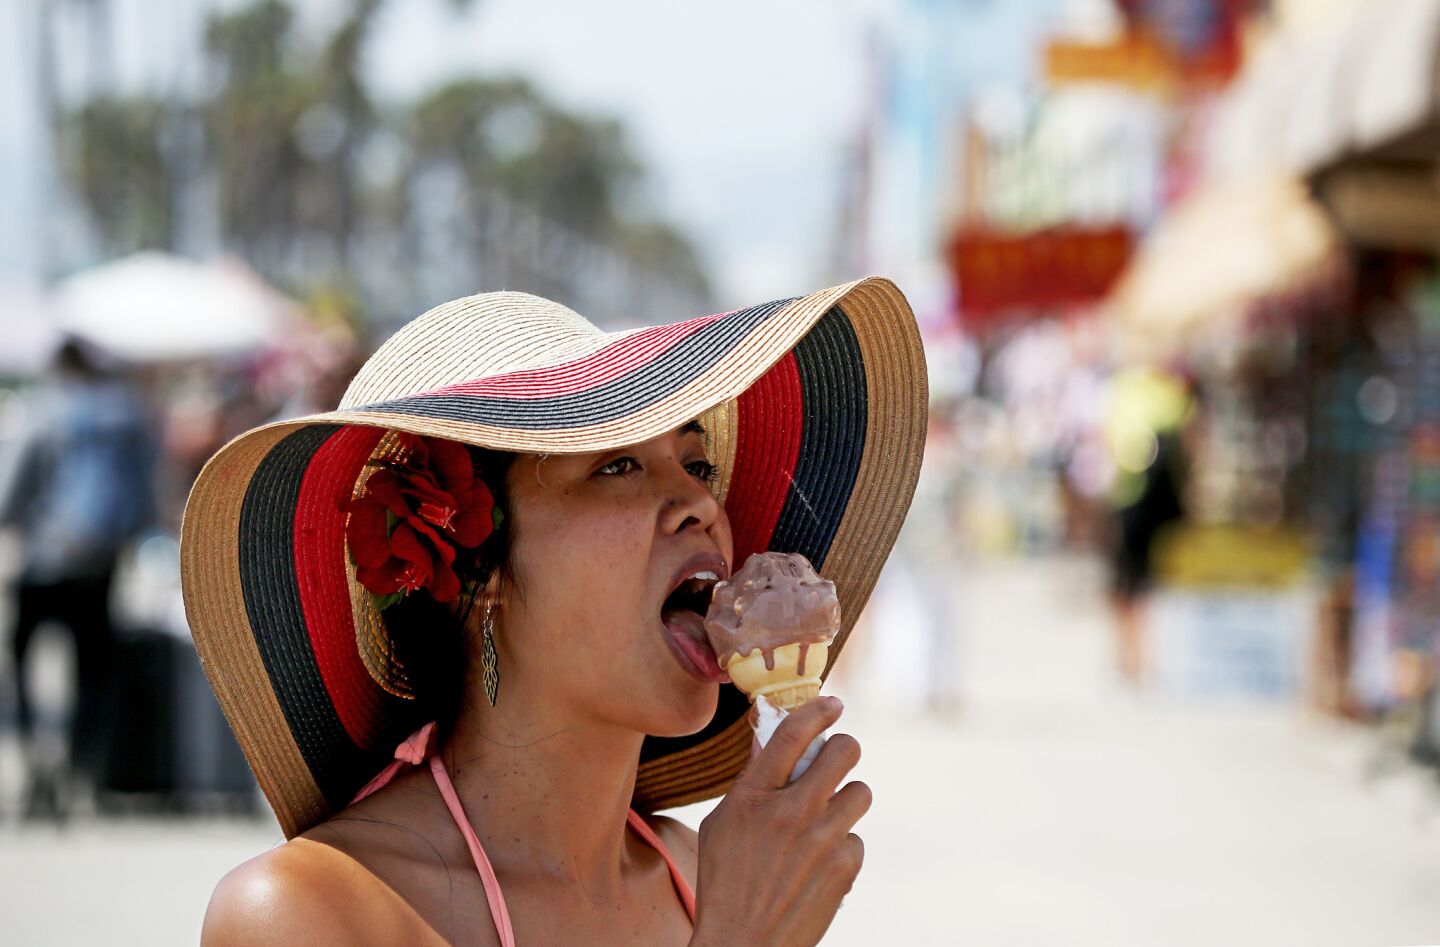 Jasmine Ejan cools off with a cone of chocolate ice cream on a warm afternoon in Venice Beach.